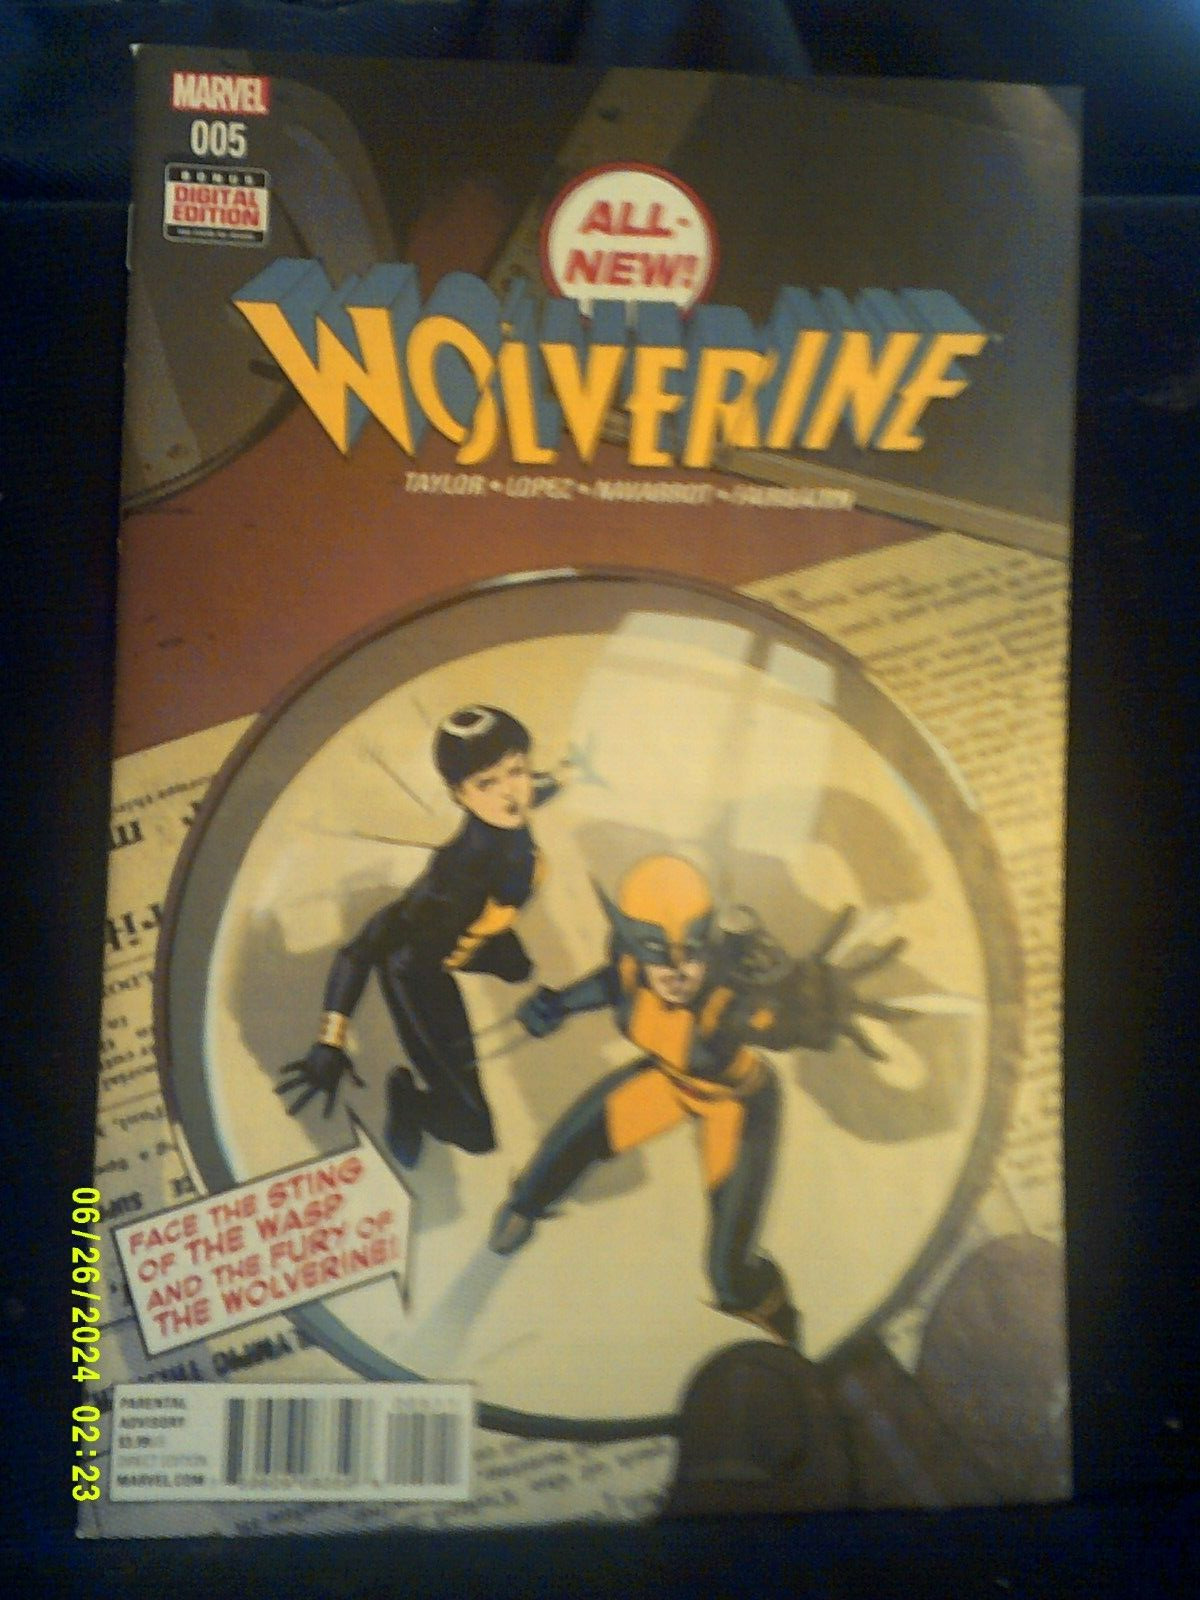 All New Wolverine # 5,6 (Marvel,2016) VF/NM Condition